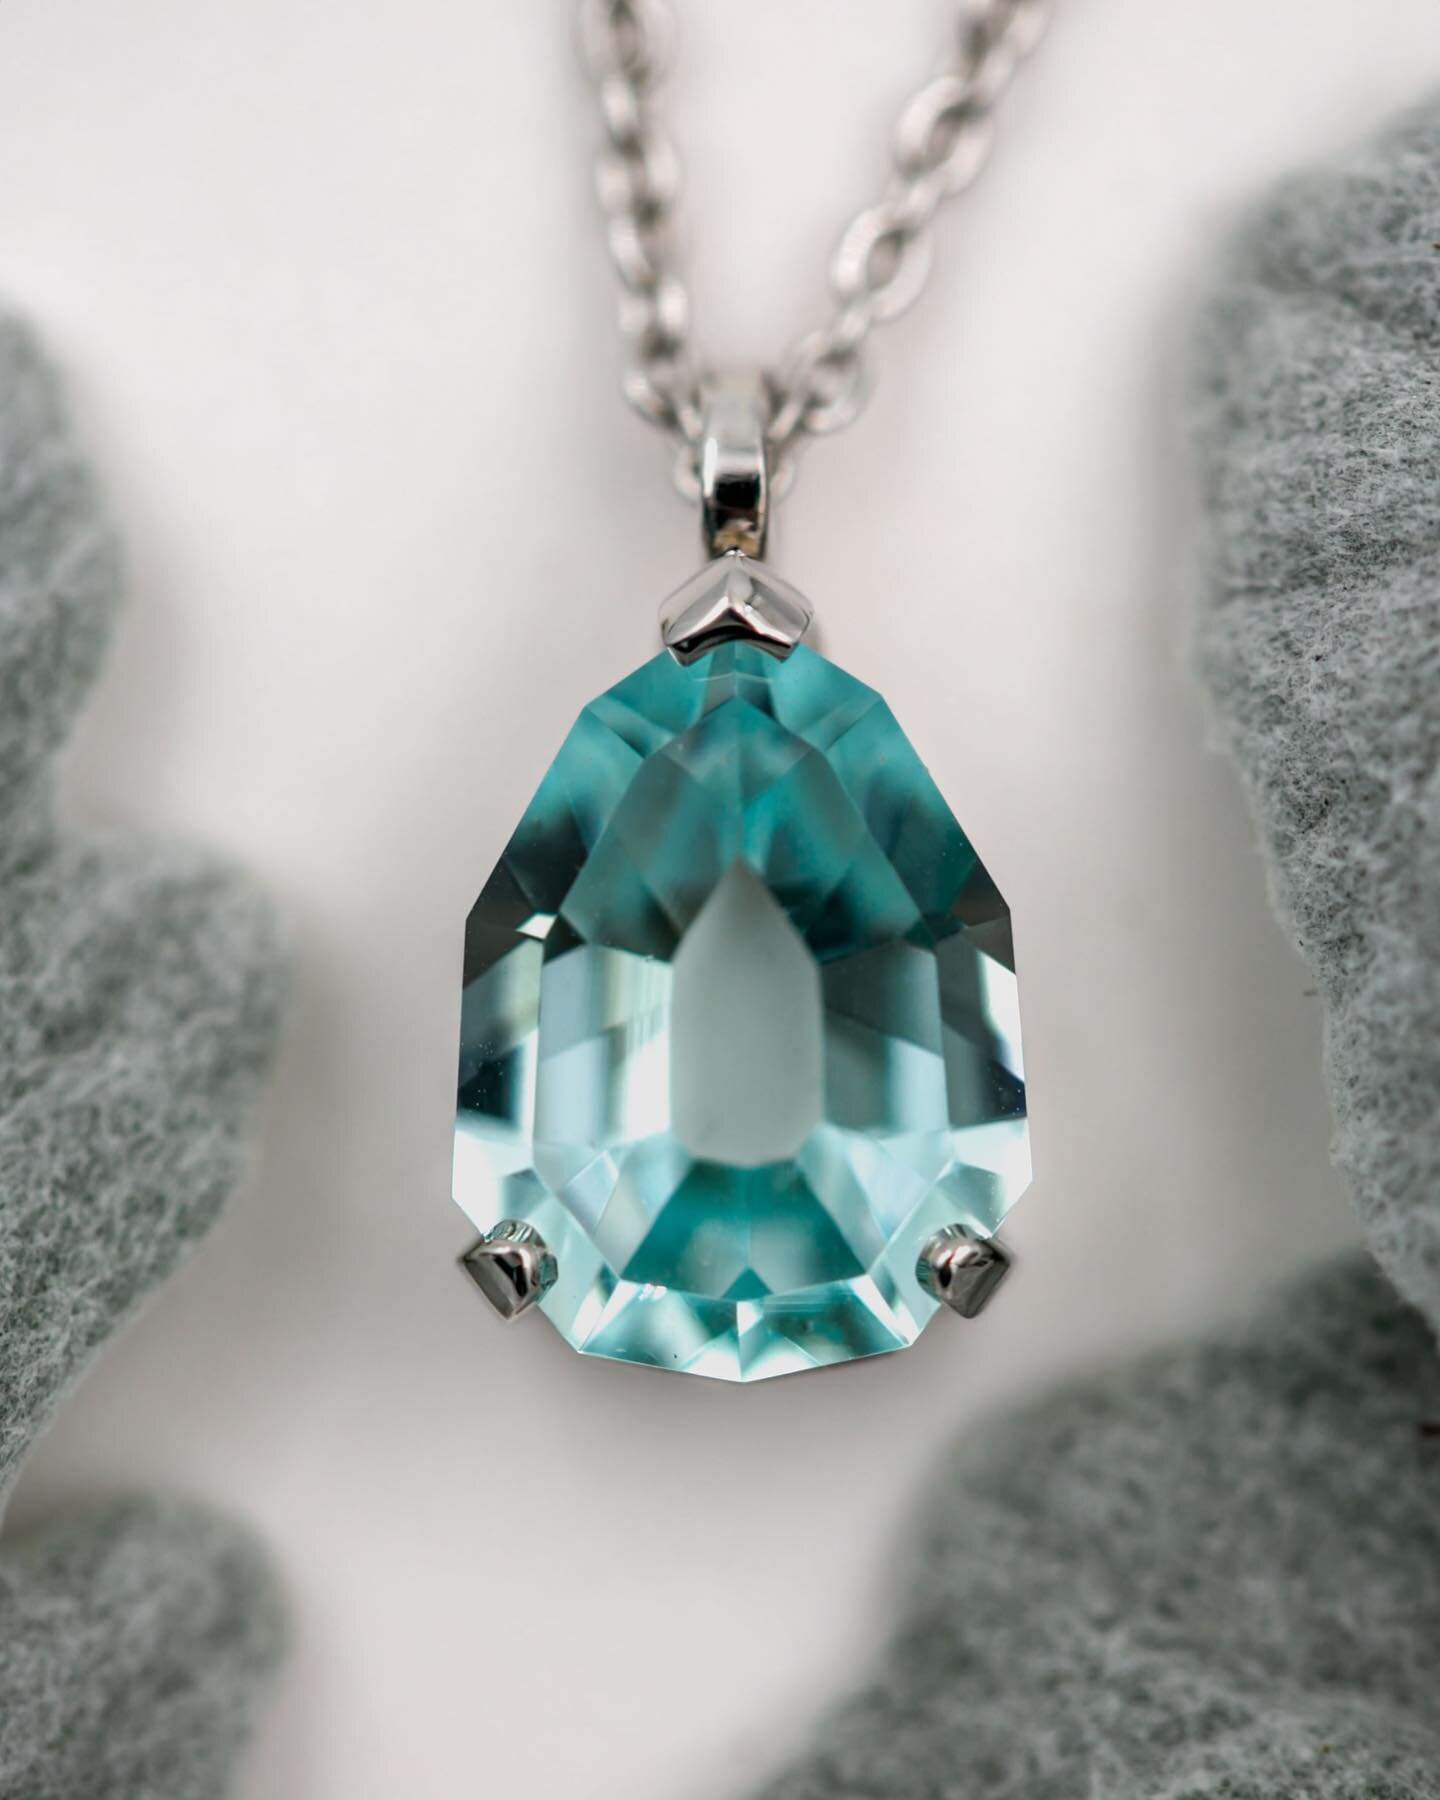 ✨Custom 3 Prong Paraiba Tourmaline Necklace in 14k White Gold for Mike✨

Tourmaline expertly cut by @premiergemstones 

Not sure about you, but this color does something to me. It&rsquo;s just luscious. 🤤

And what I love about this setting is that 